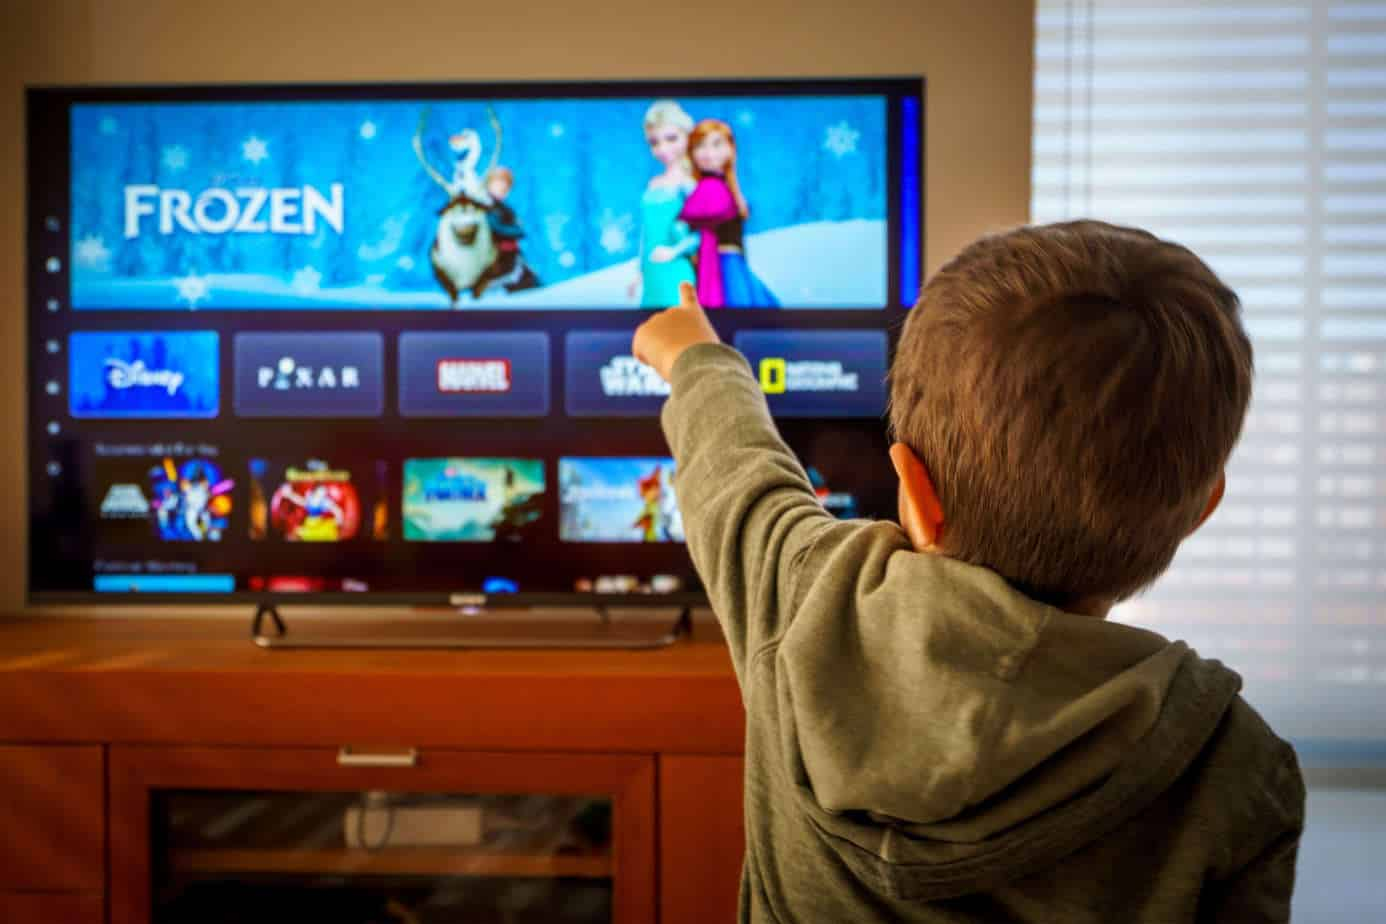 Disney Plus parental control - boy watching disney plus in a living room on a couch pointing the remote at the TV